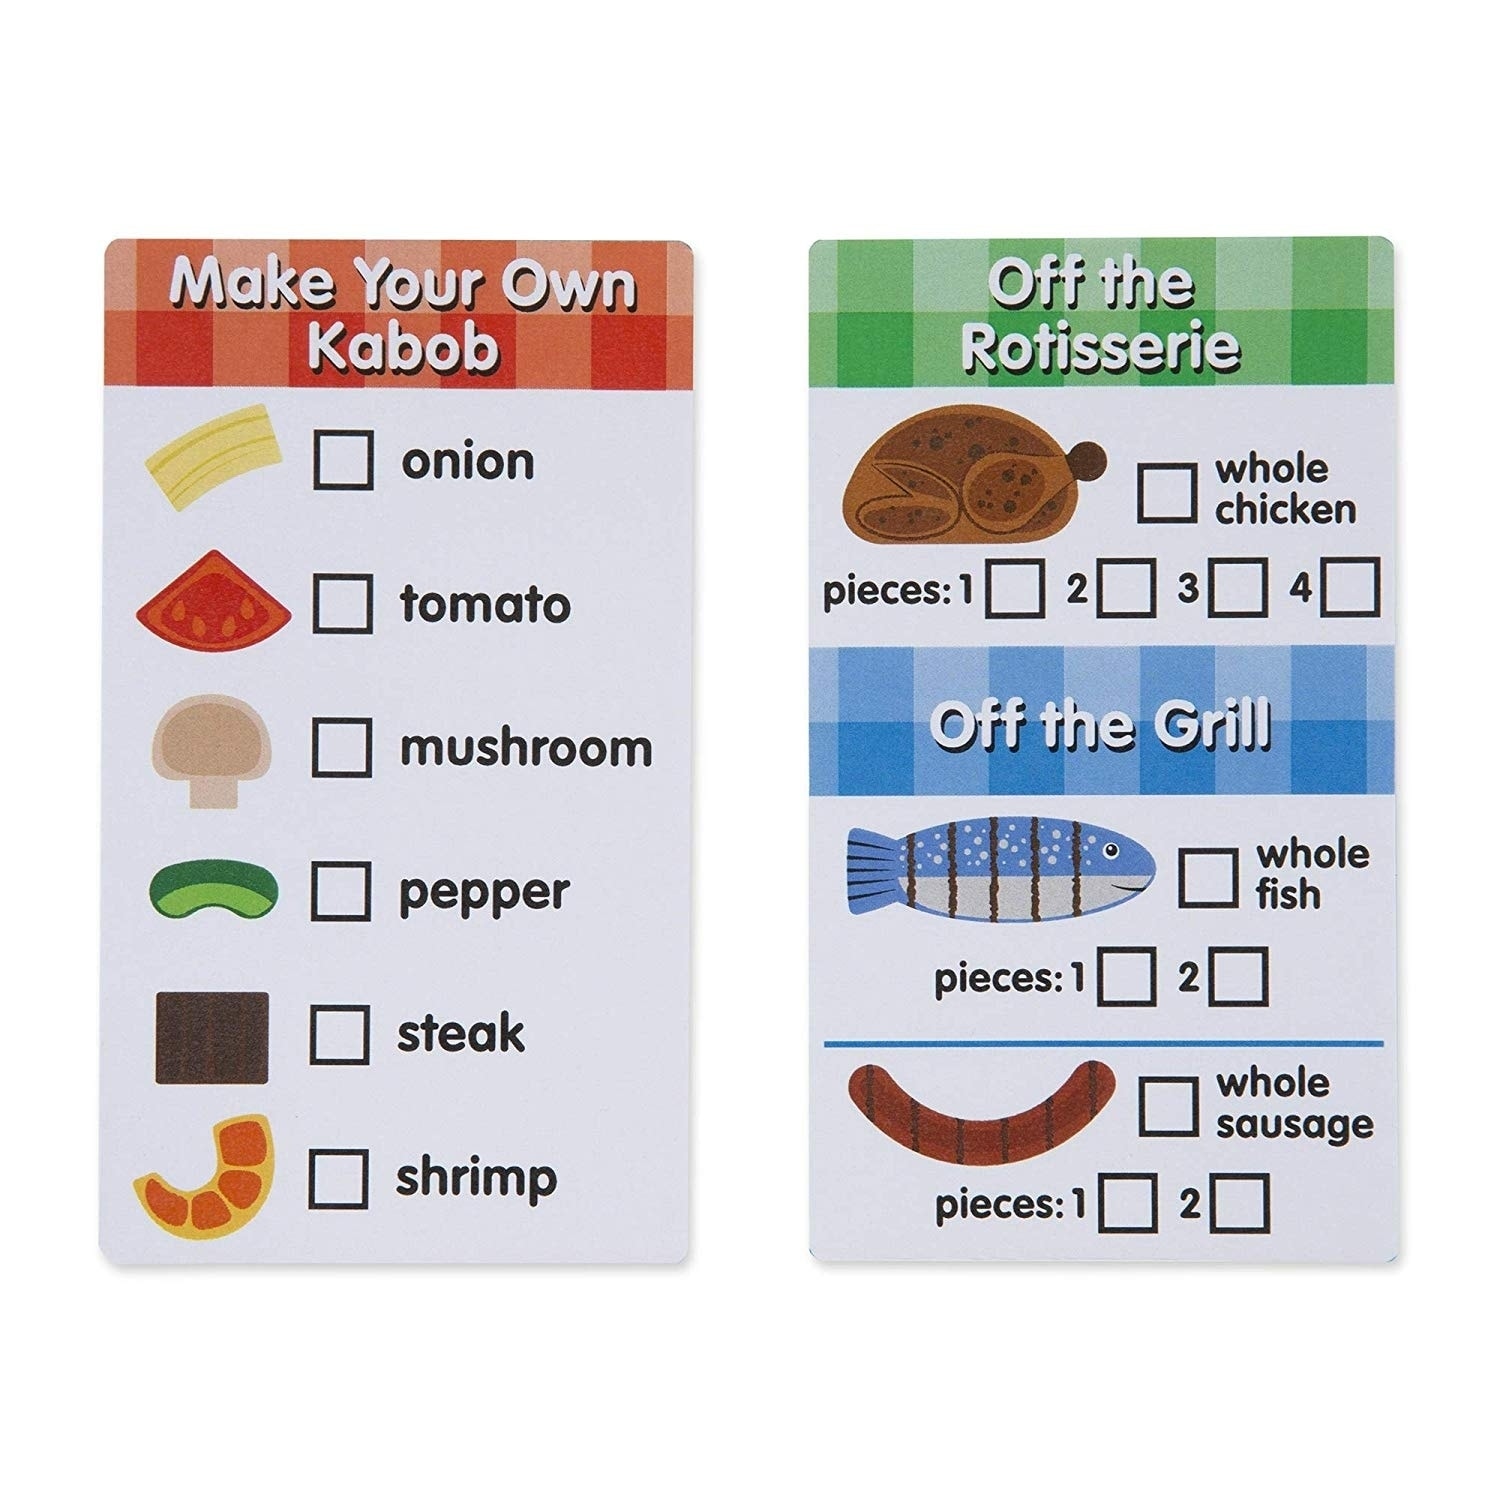 melissa and doug rotisserie & grill barbecue set